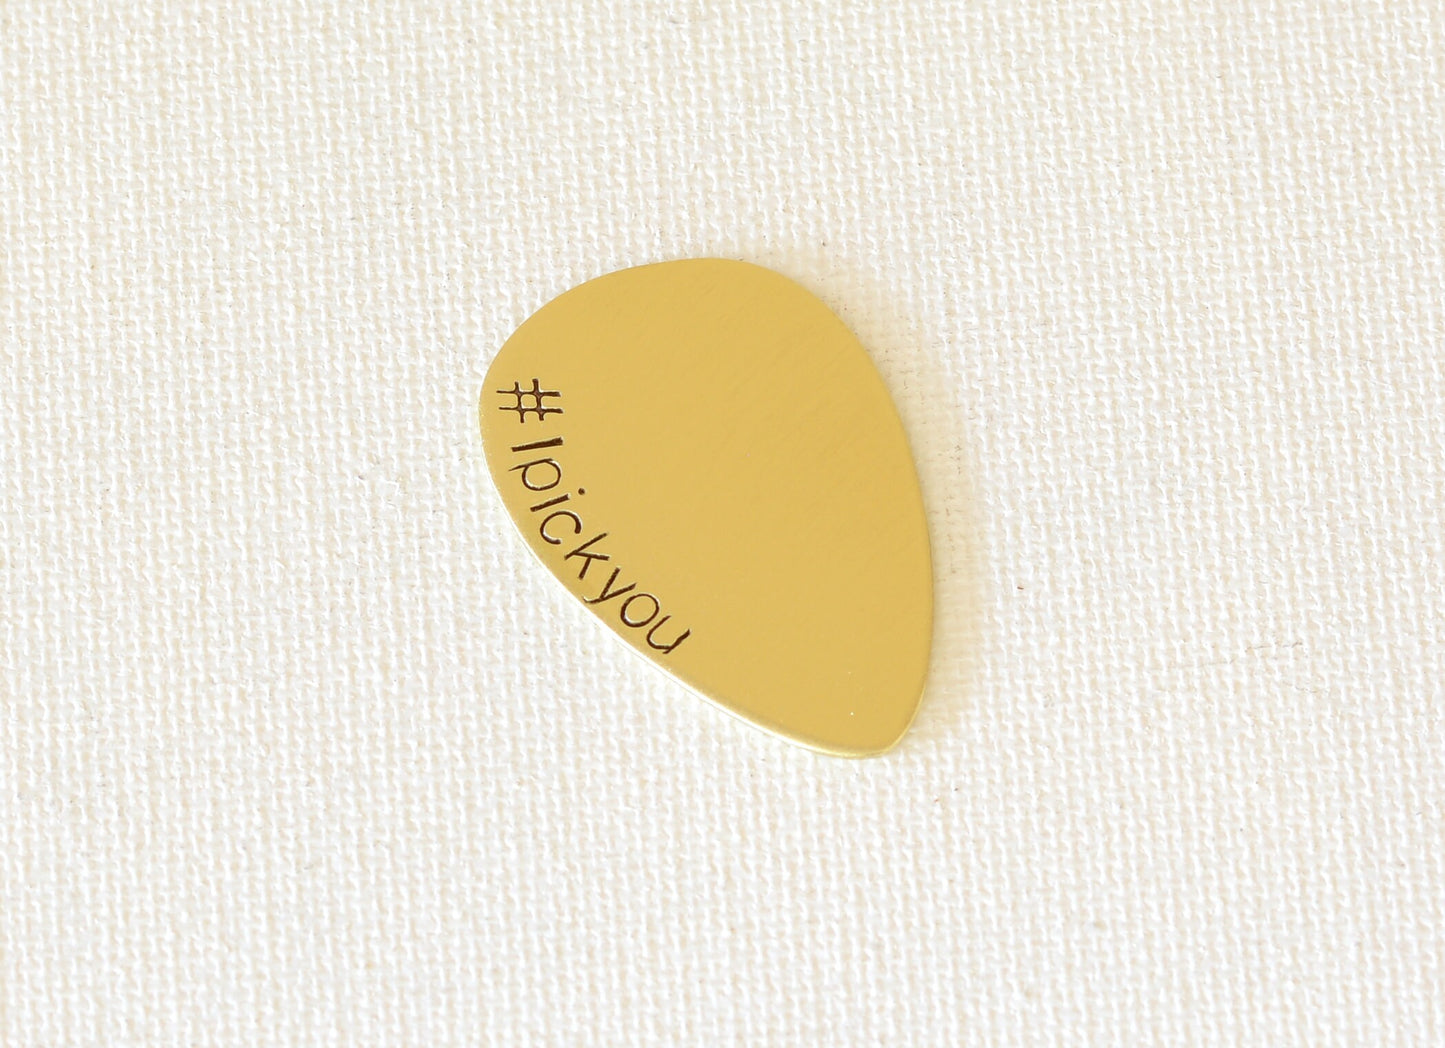 Bronze Tear Drop Style Jazz Guitar Pick with a Hashtag I Pick You